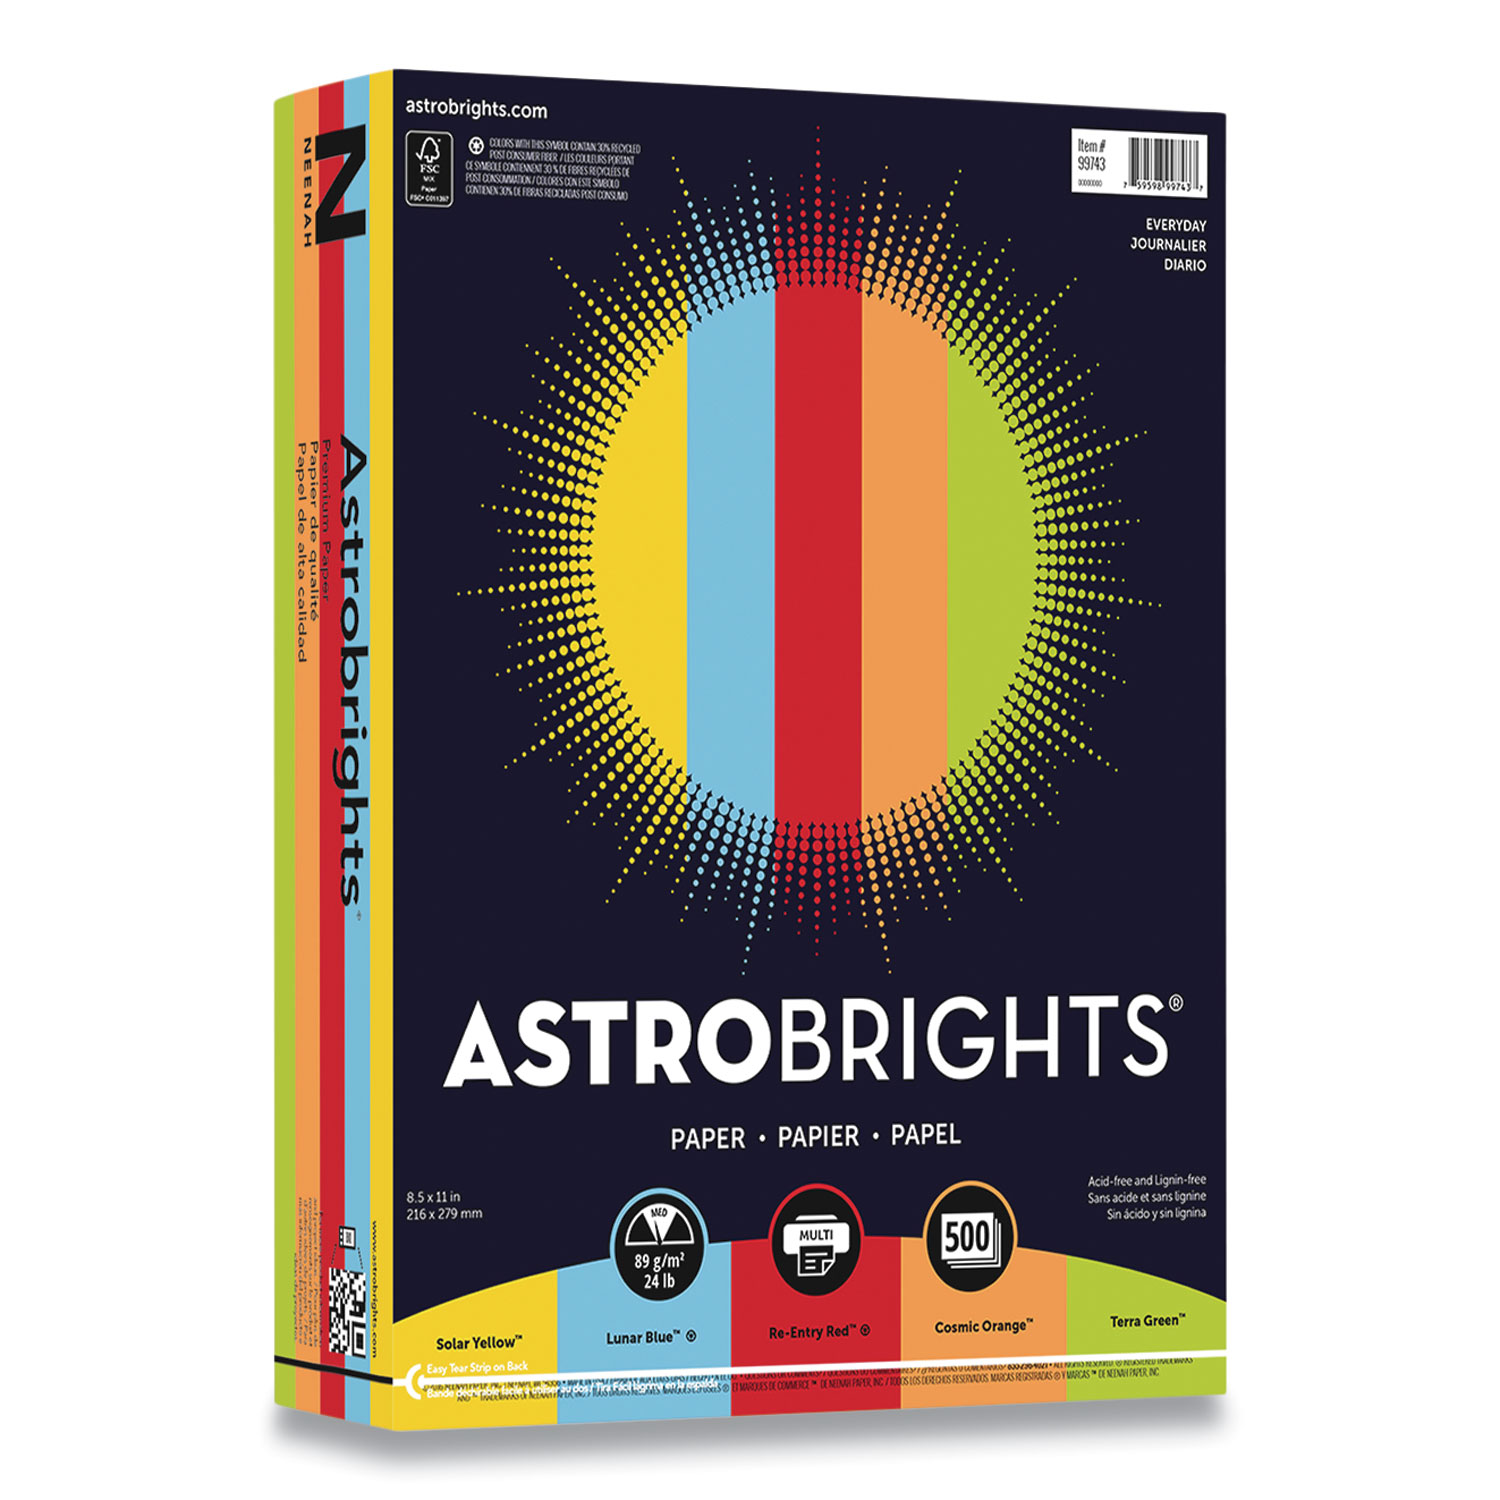 Astrobrights® Color Paper, 24 lb, 8.5 x 11, Assorted Everyday Colors, 500/Ream